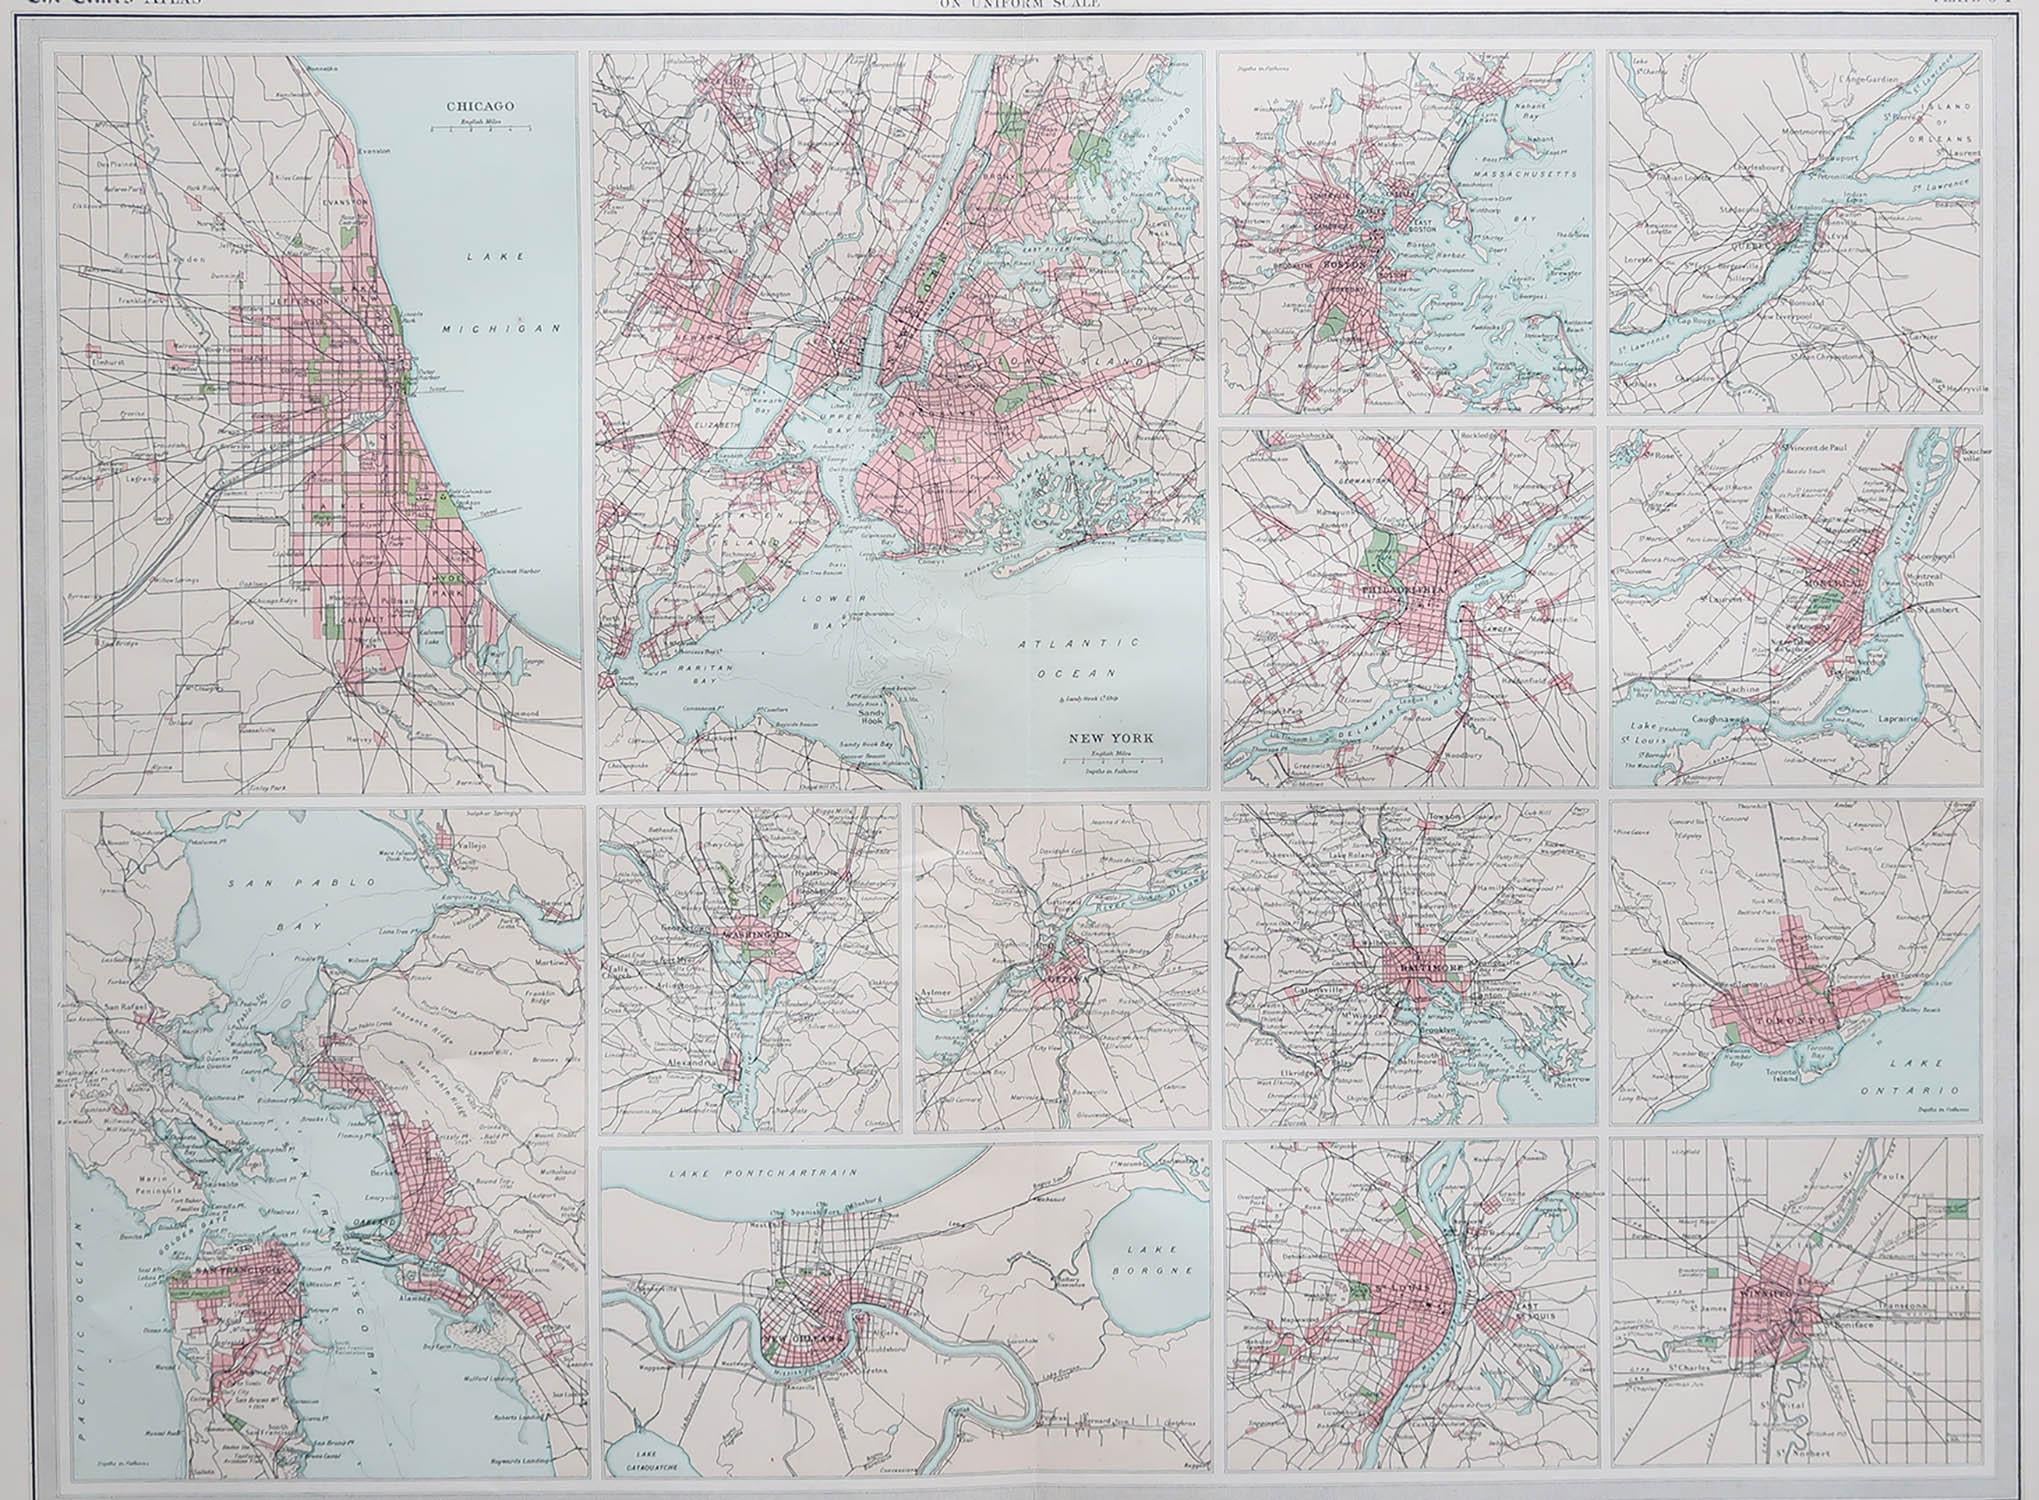 Great maps of American Cities

Unframed

Original color

By John Bartholomew and Co. Edinburgh Geographical Institute

Published, circa 1920